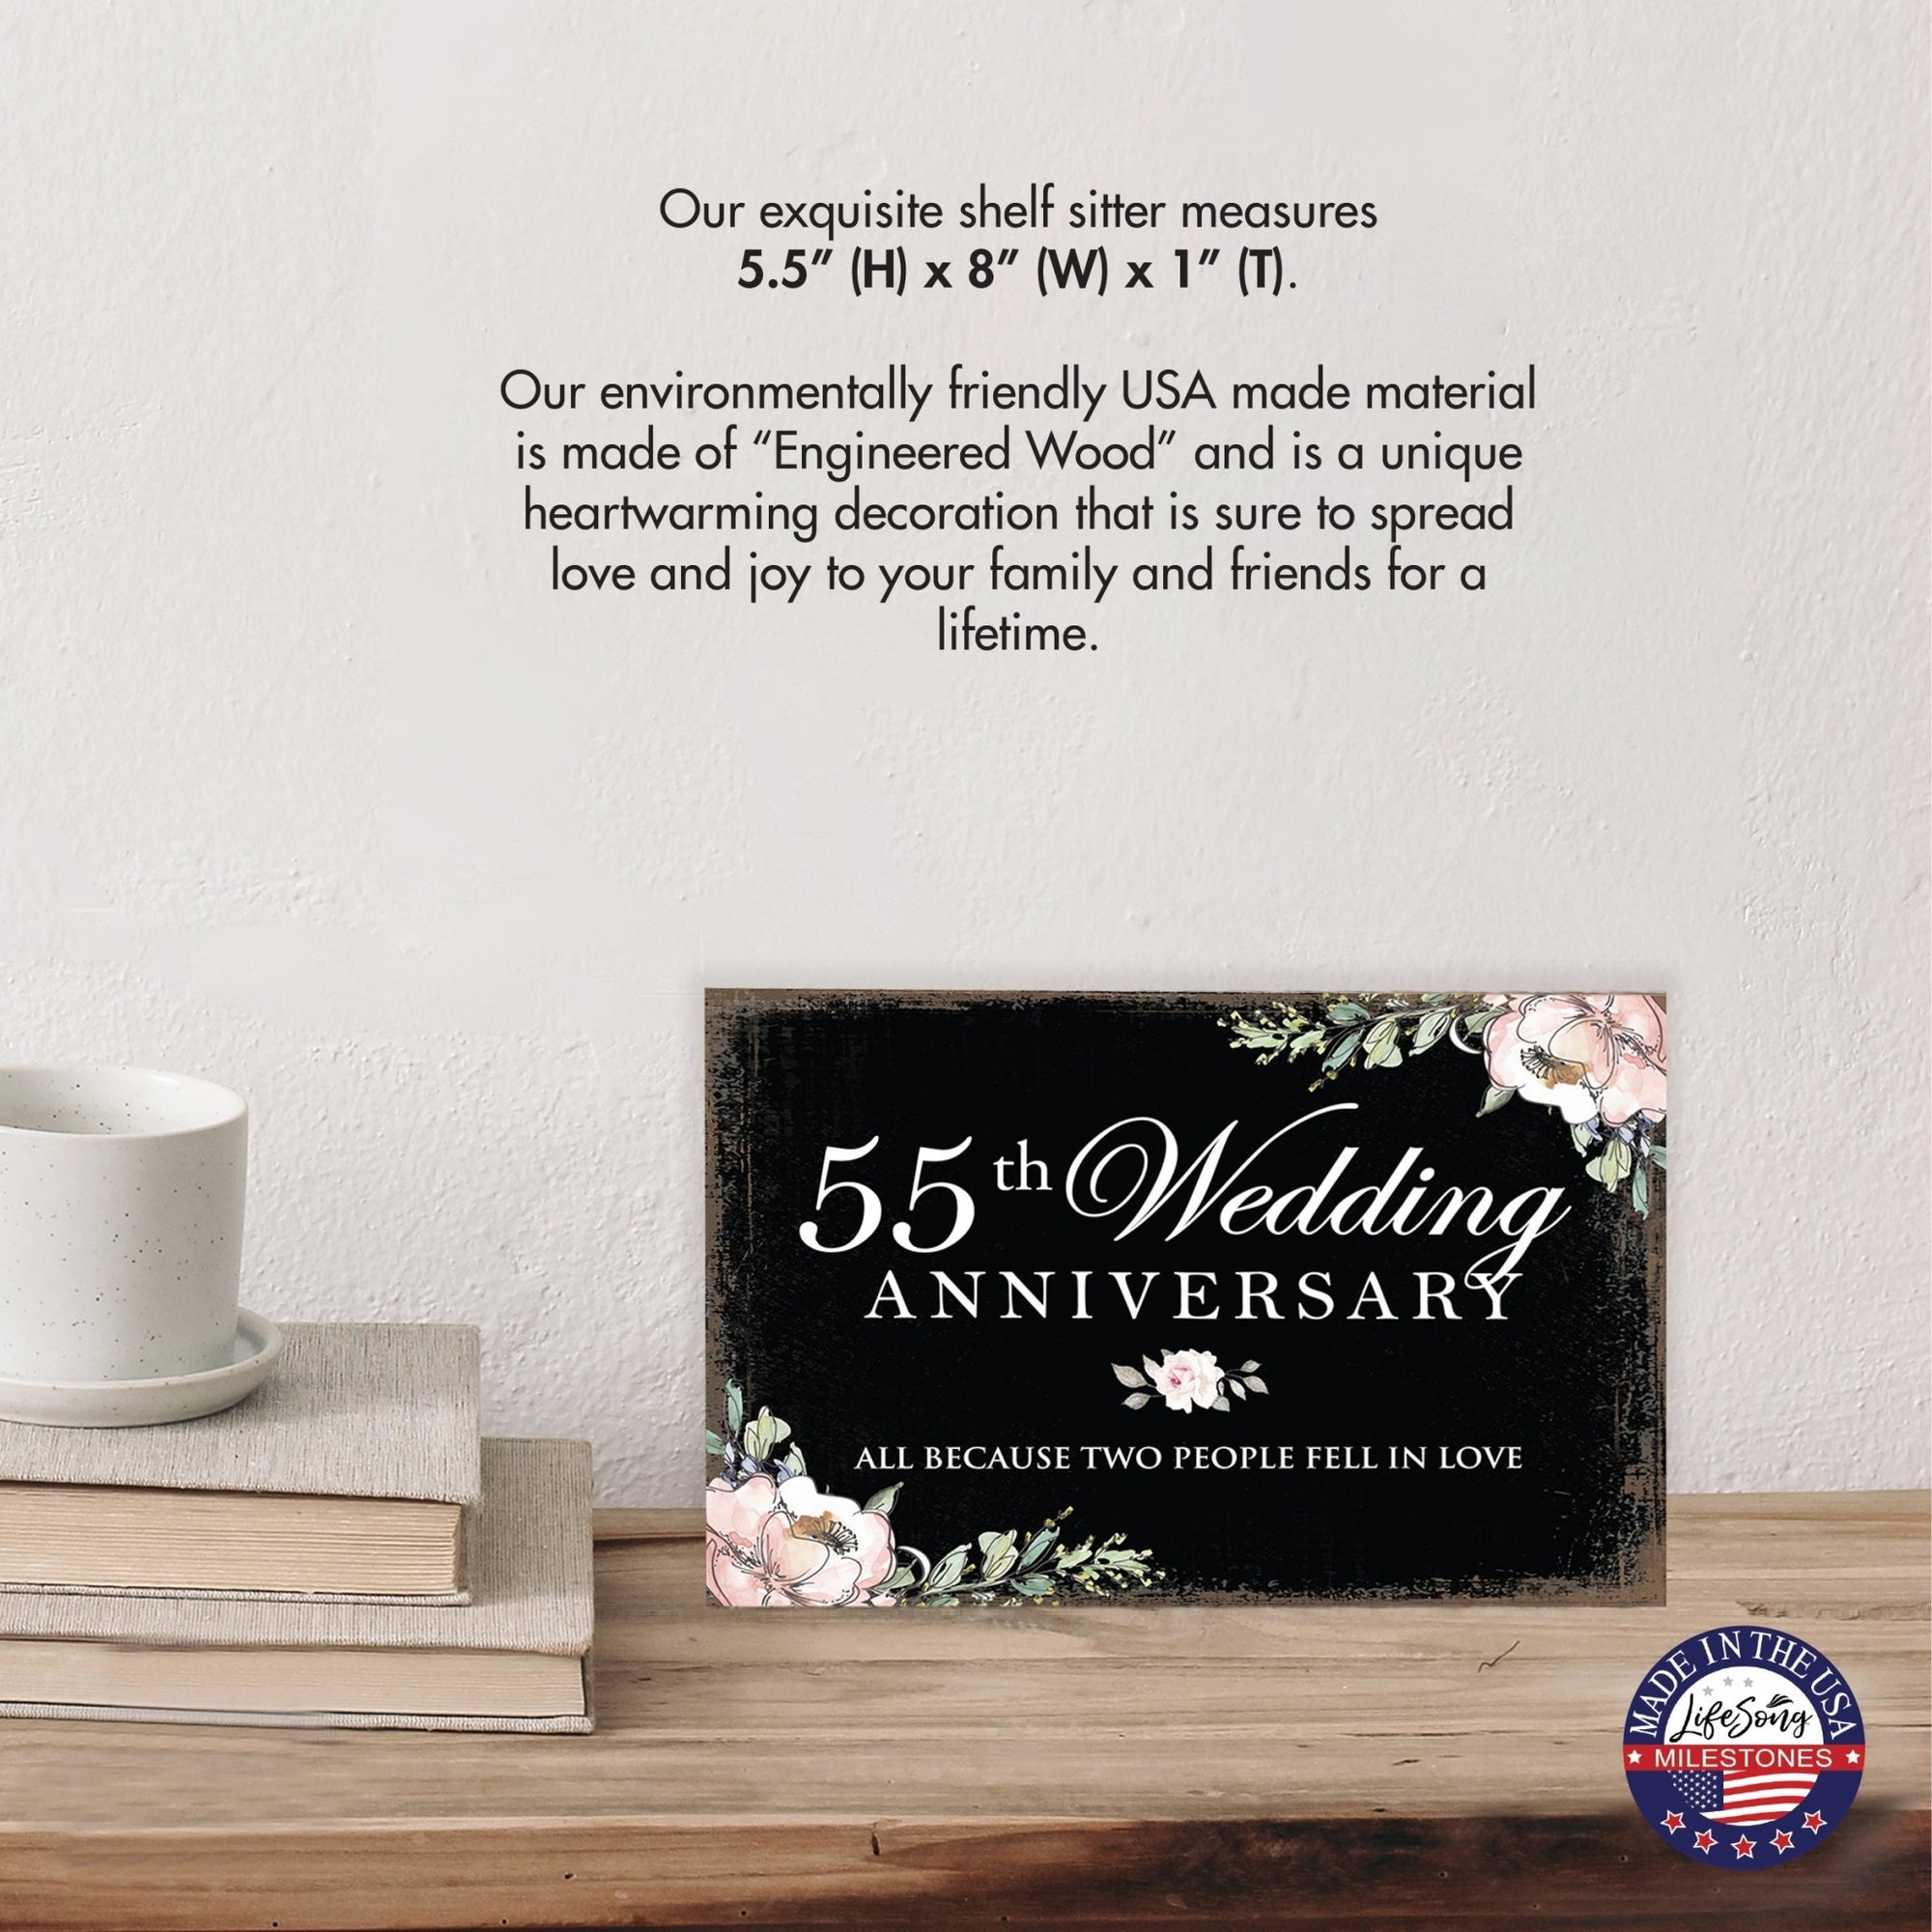 55th Wedding Anniversary Unique Shelf Decor and Tabletop Signs Gifts for Couples - Fell In Love - LifeSong Milestones